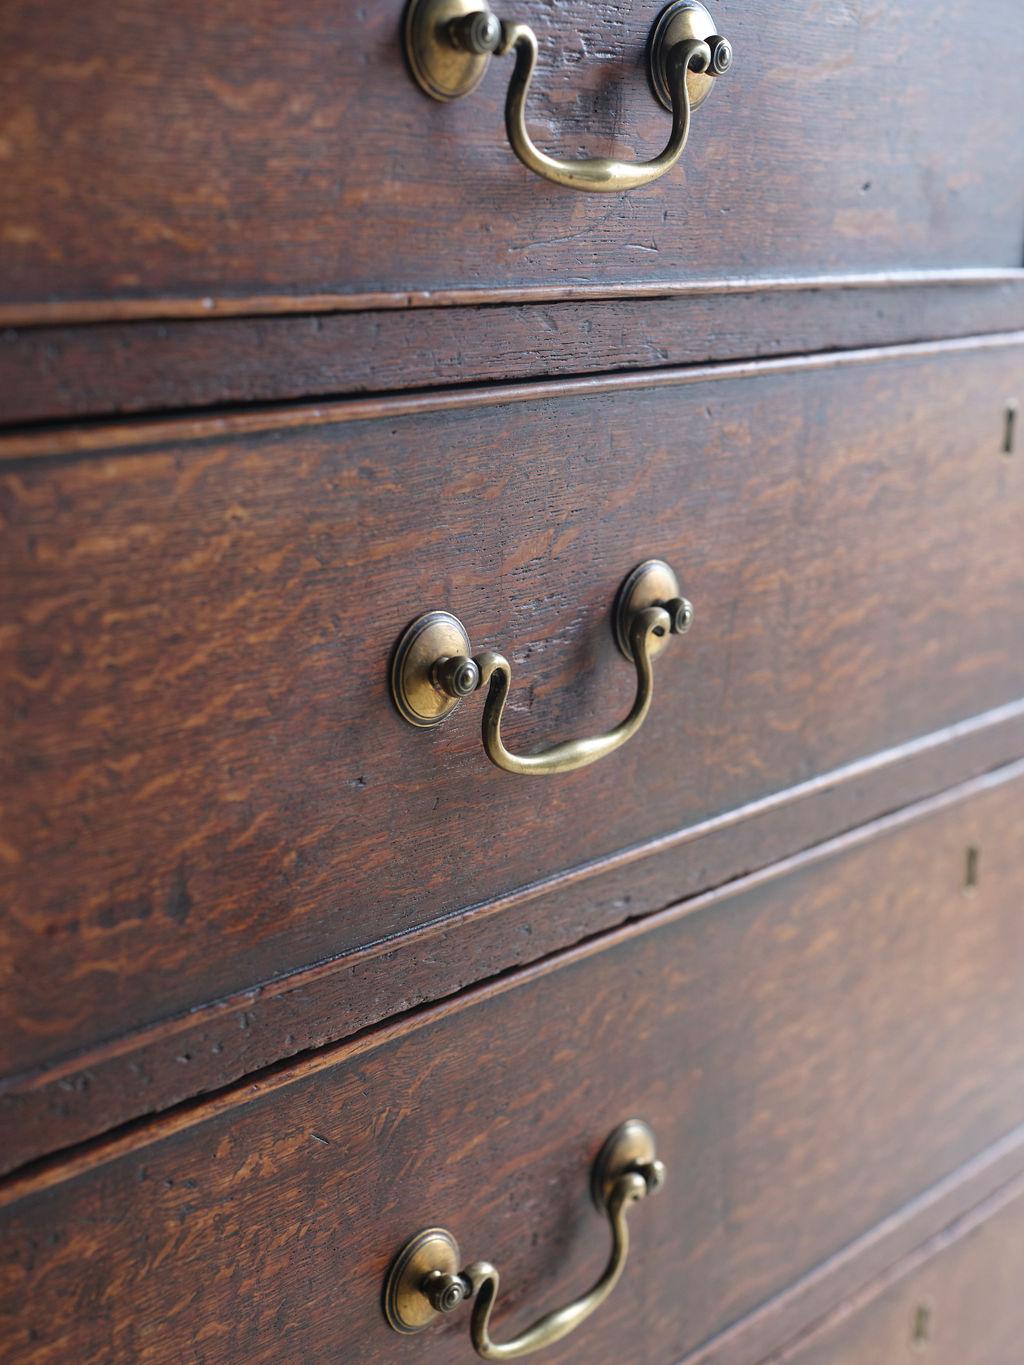 This is an elegant George III period oak chest of drawers. The medium dark patina has a beautiful patina. There are two smaller top drawers and 5 larger drawers. All of the drawers have key holes but this piece did not come with a key. The brass